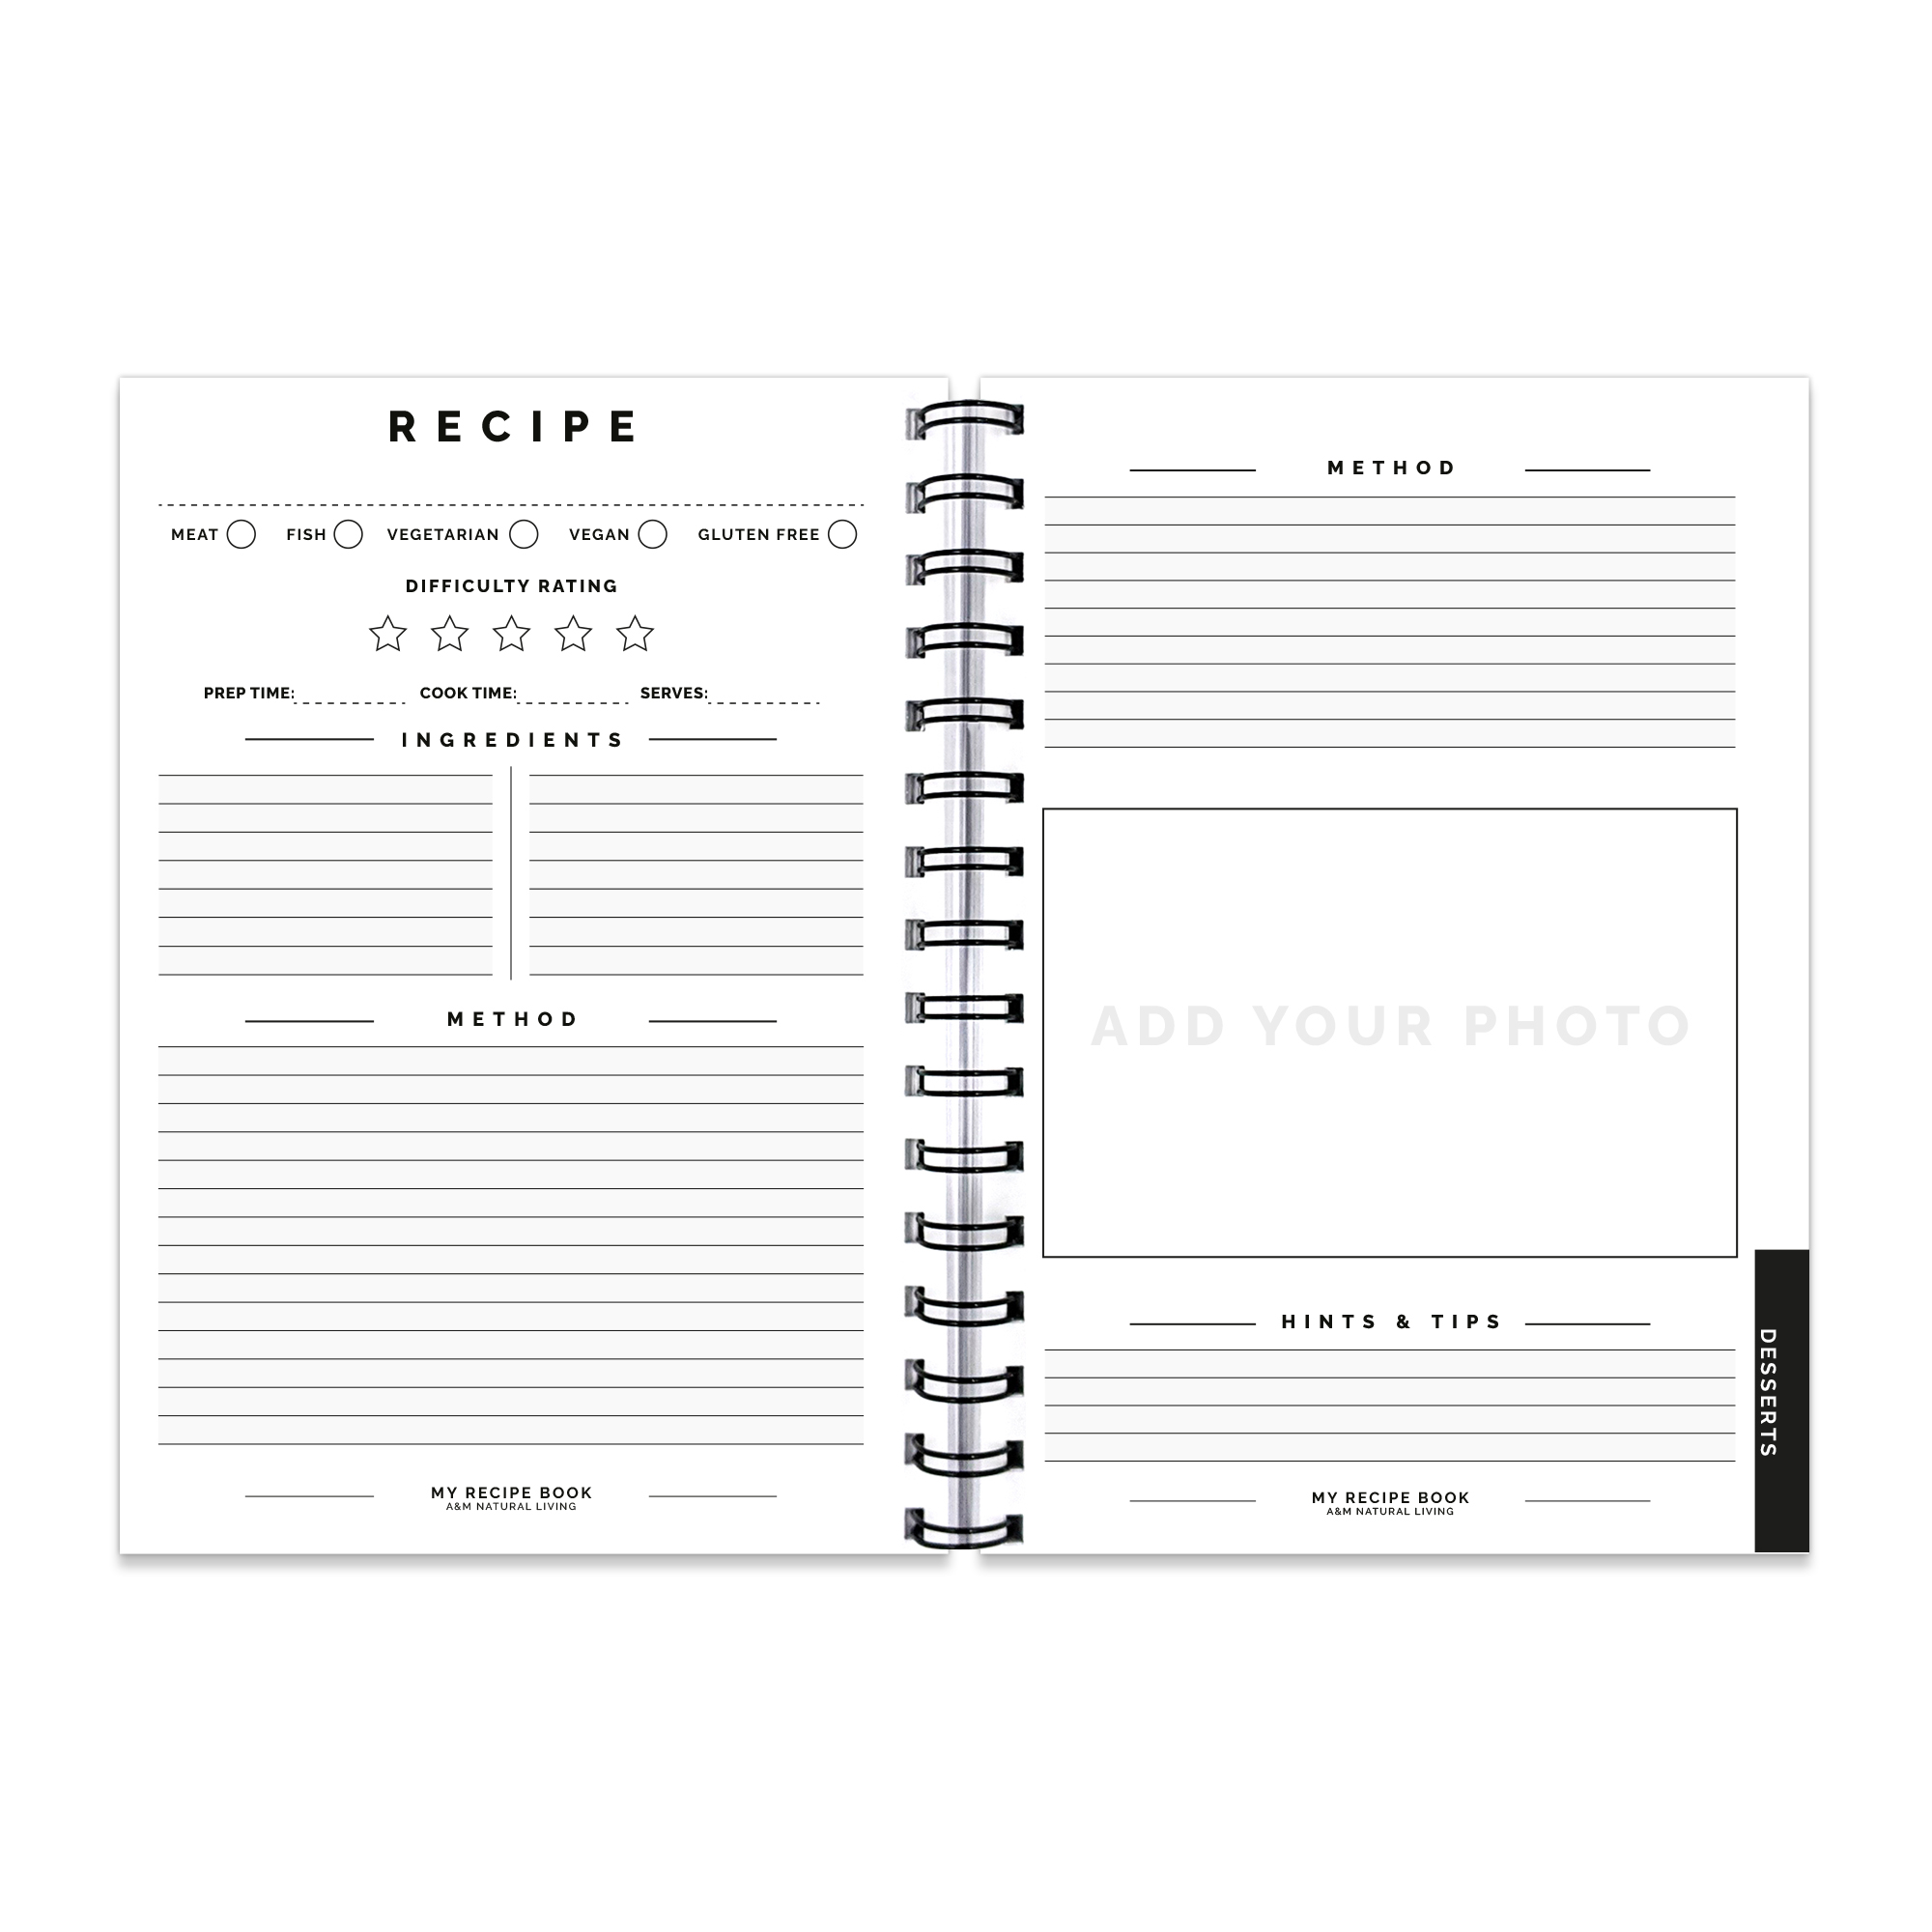 Blank Recipe Book For Own Recipes - A&M Natural Living - Free Shipping